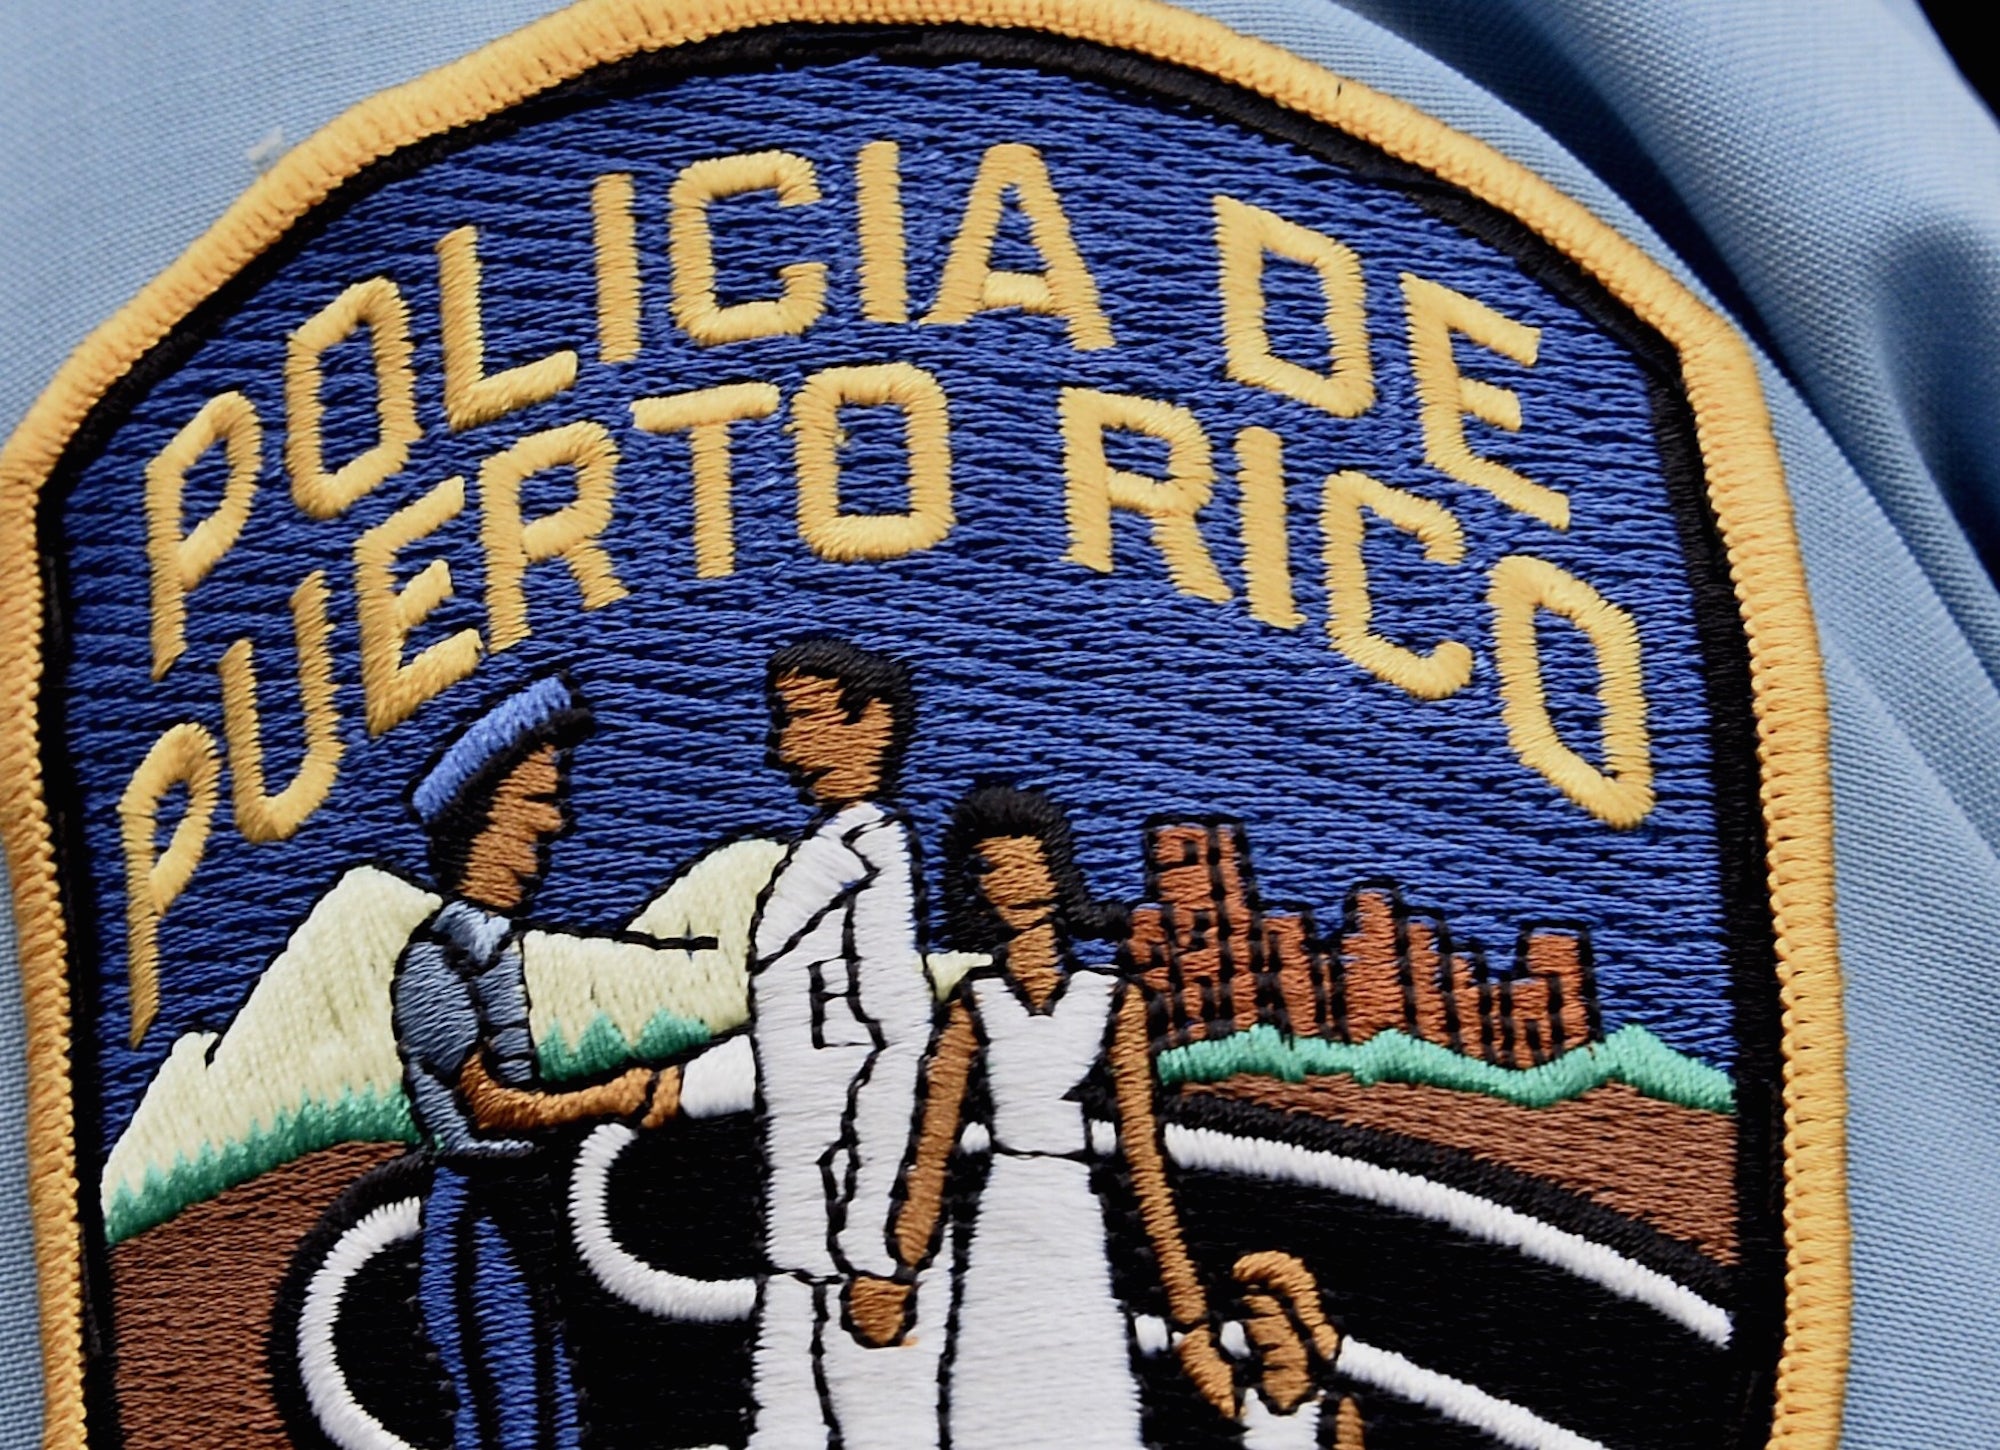 A police officer's shoulder patch is seen in the old town district in San Juan, Puerto Rico. AFP PHOTO / PAUL J. RICHARDS